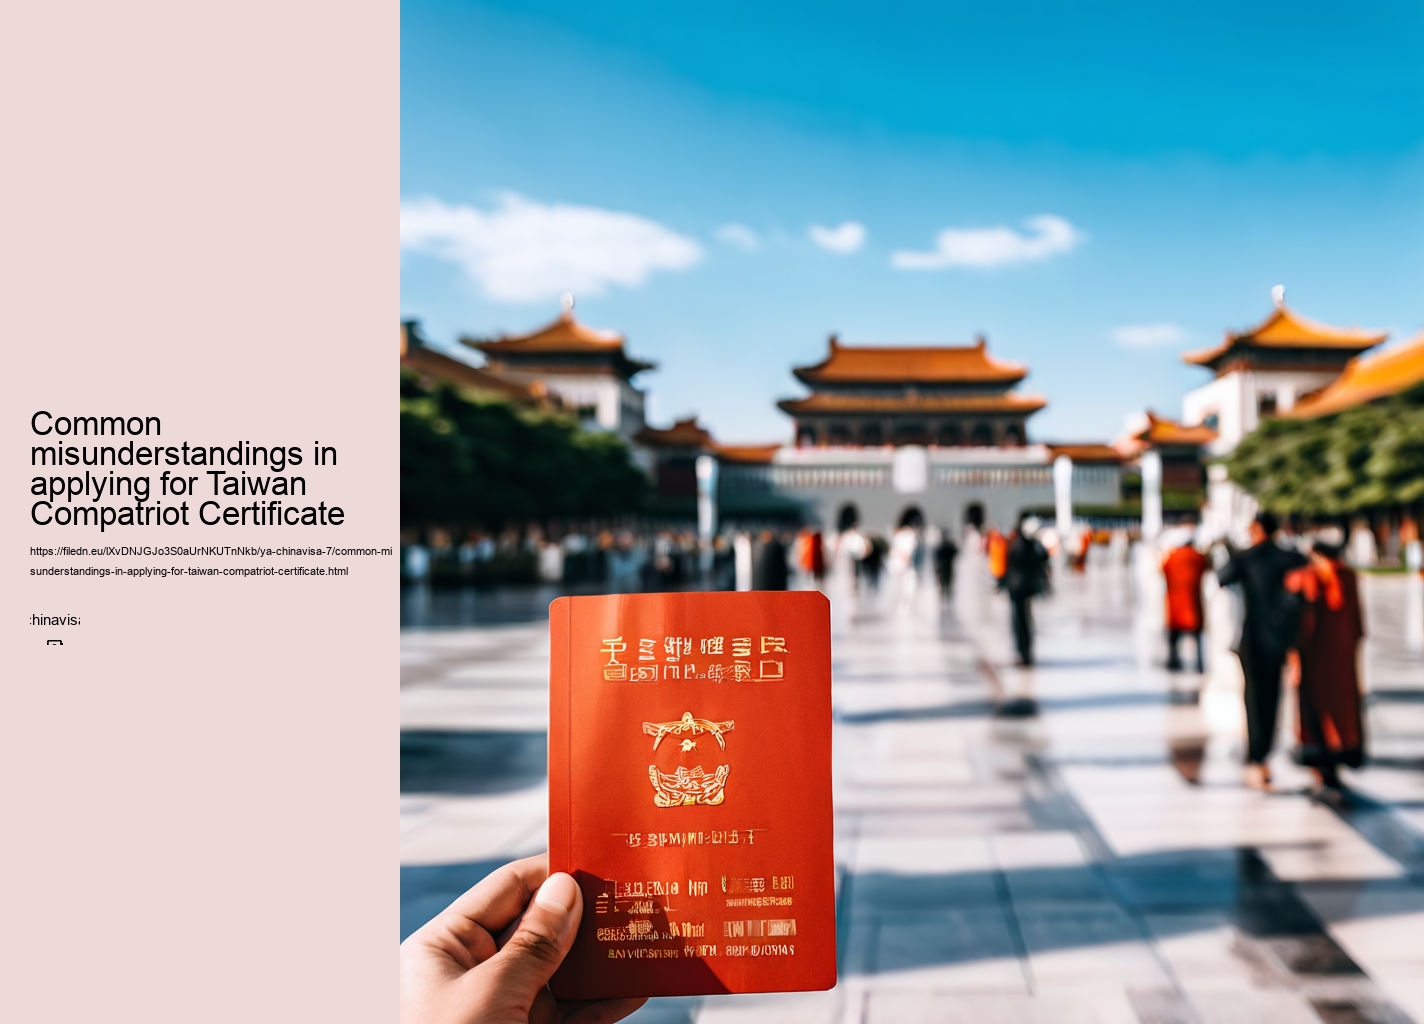 Common misunderstandings in applying for Taiwan Compatriot Certificate